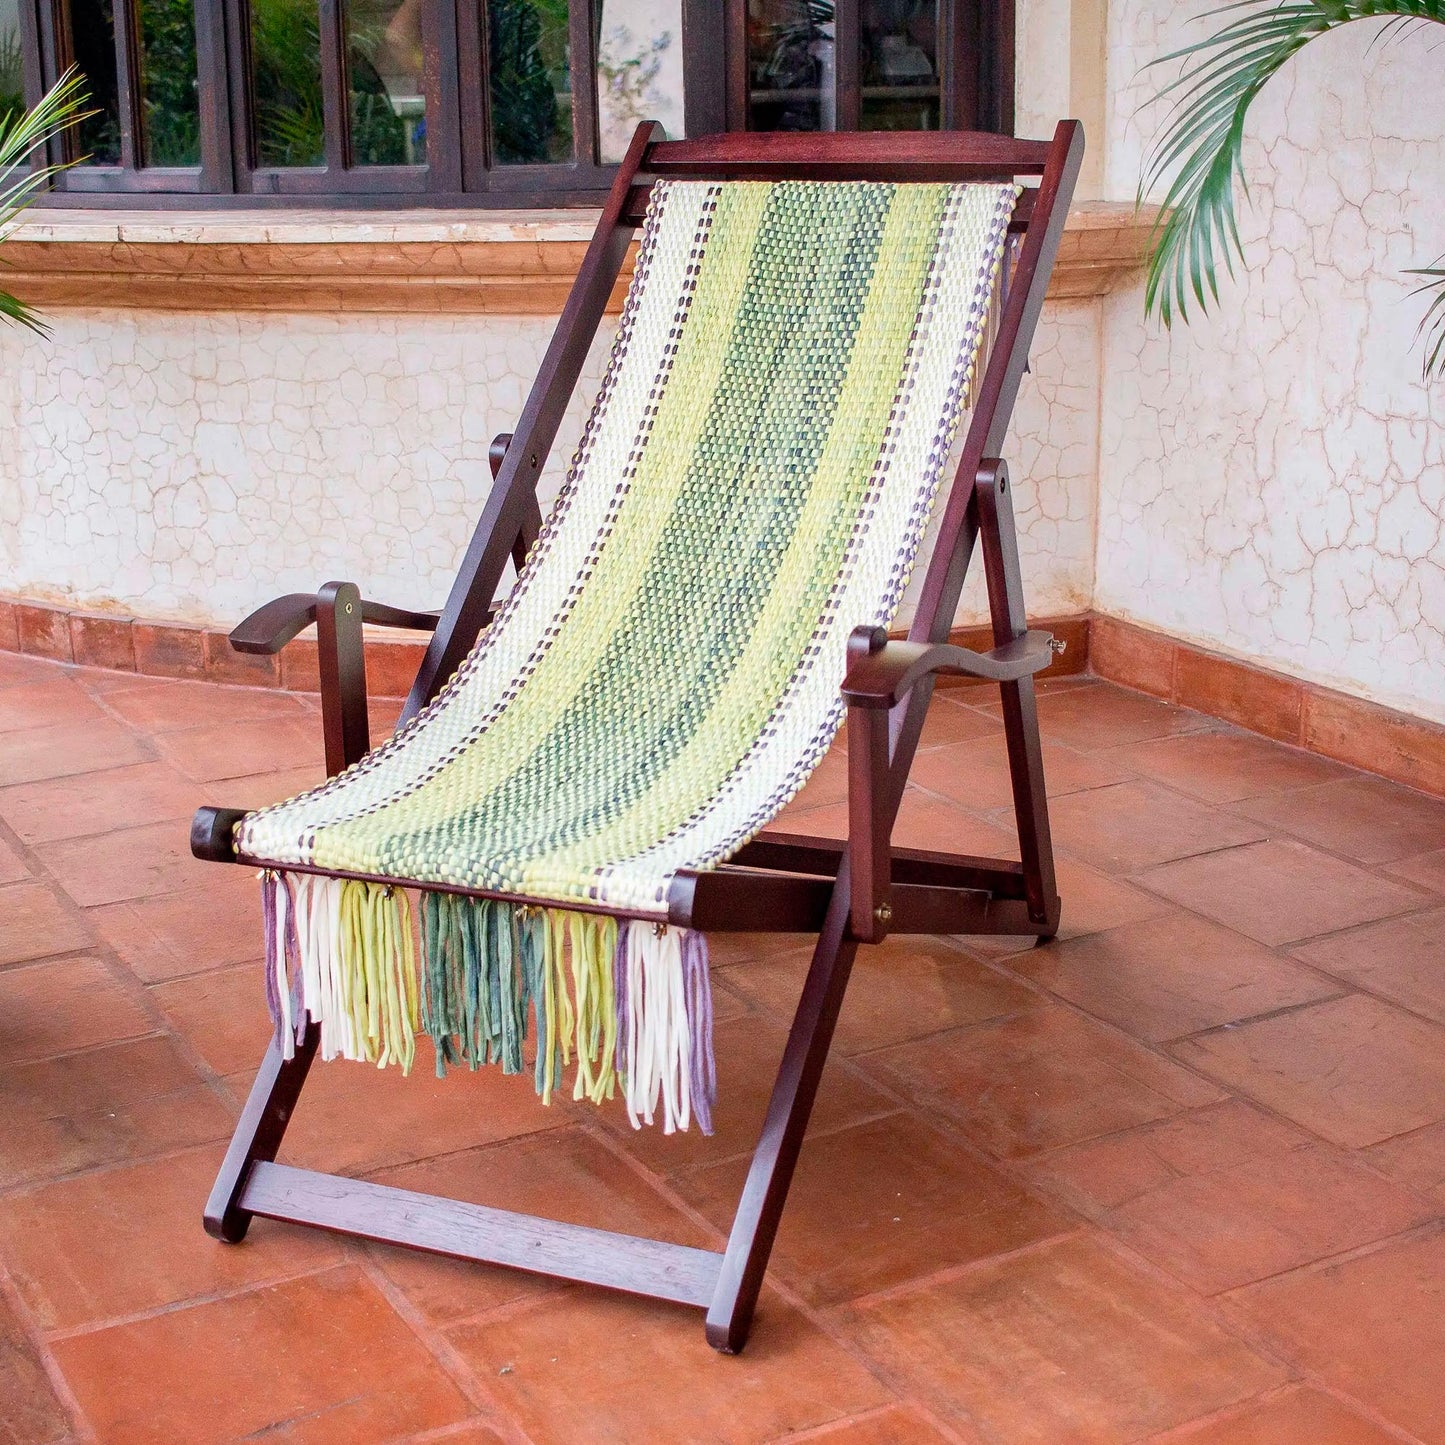 Paradise Fields Adjustable Wood Frame Recycled Cotton Blend Hammock Chair